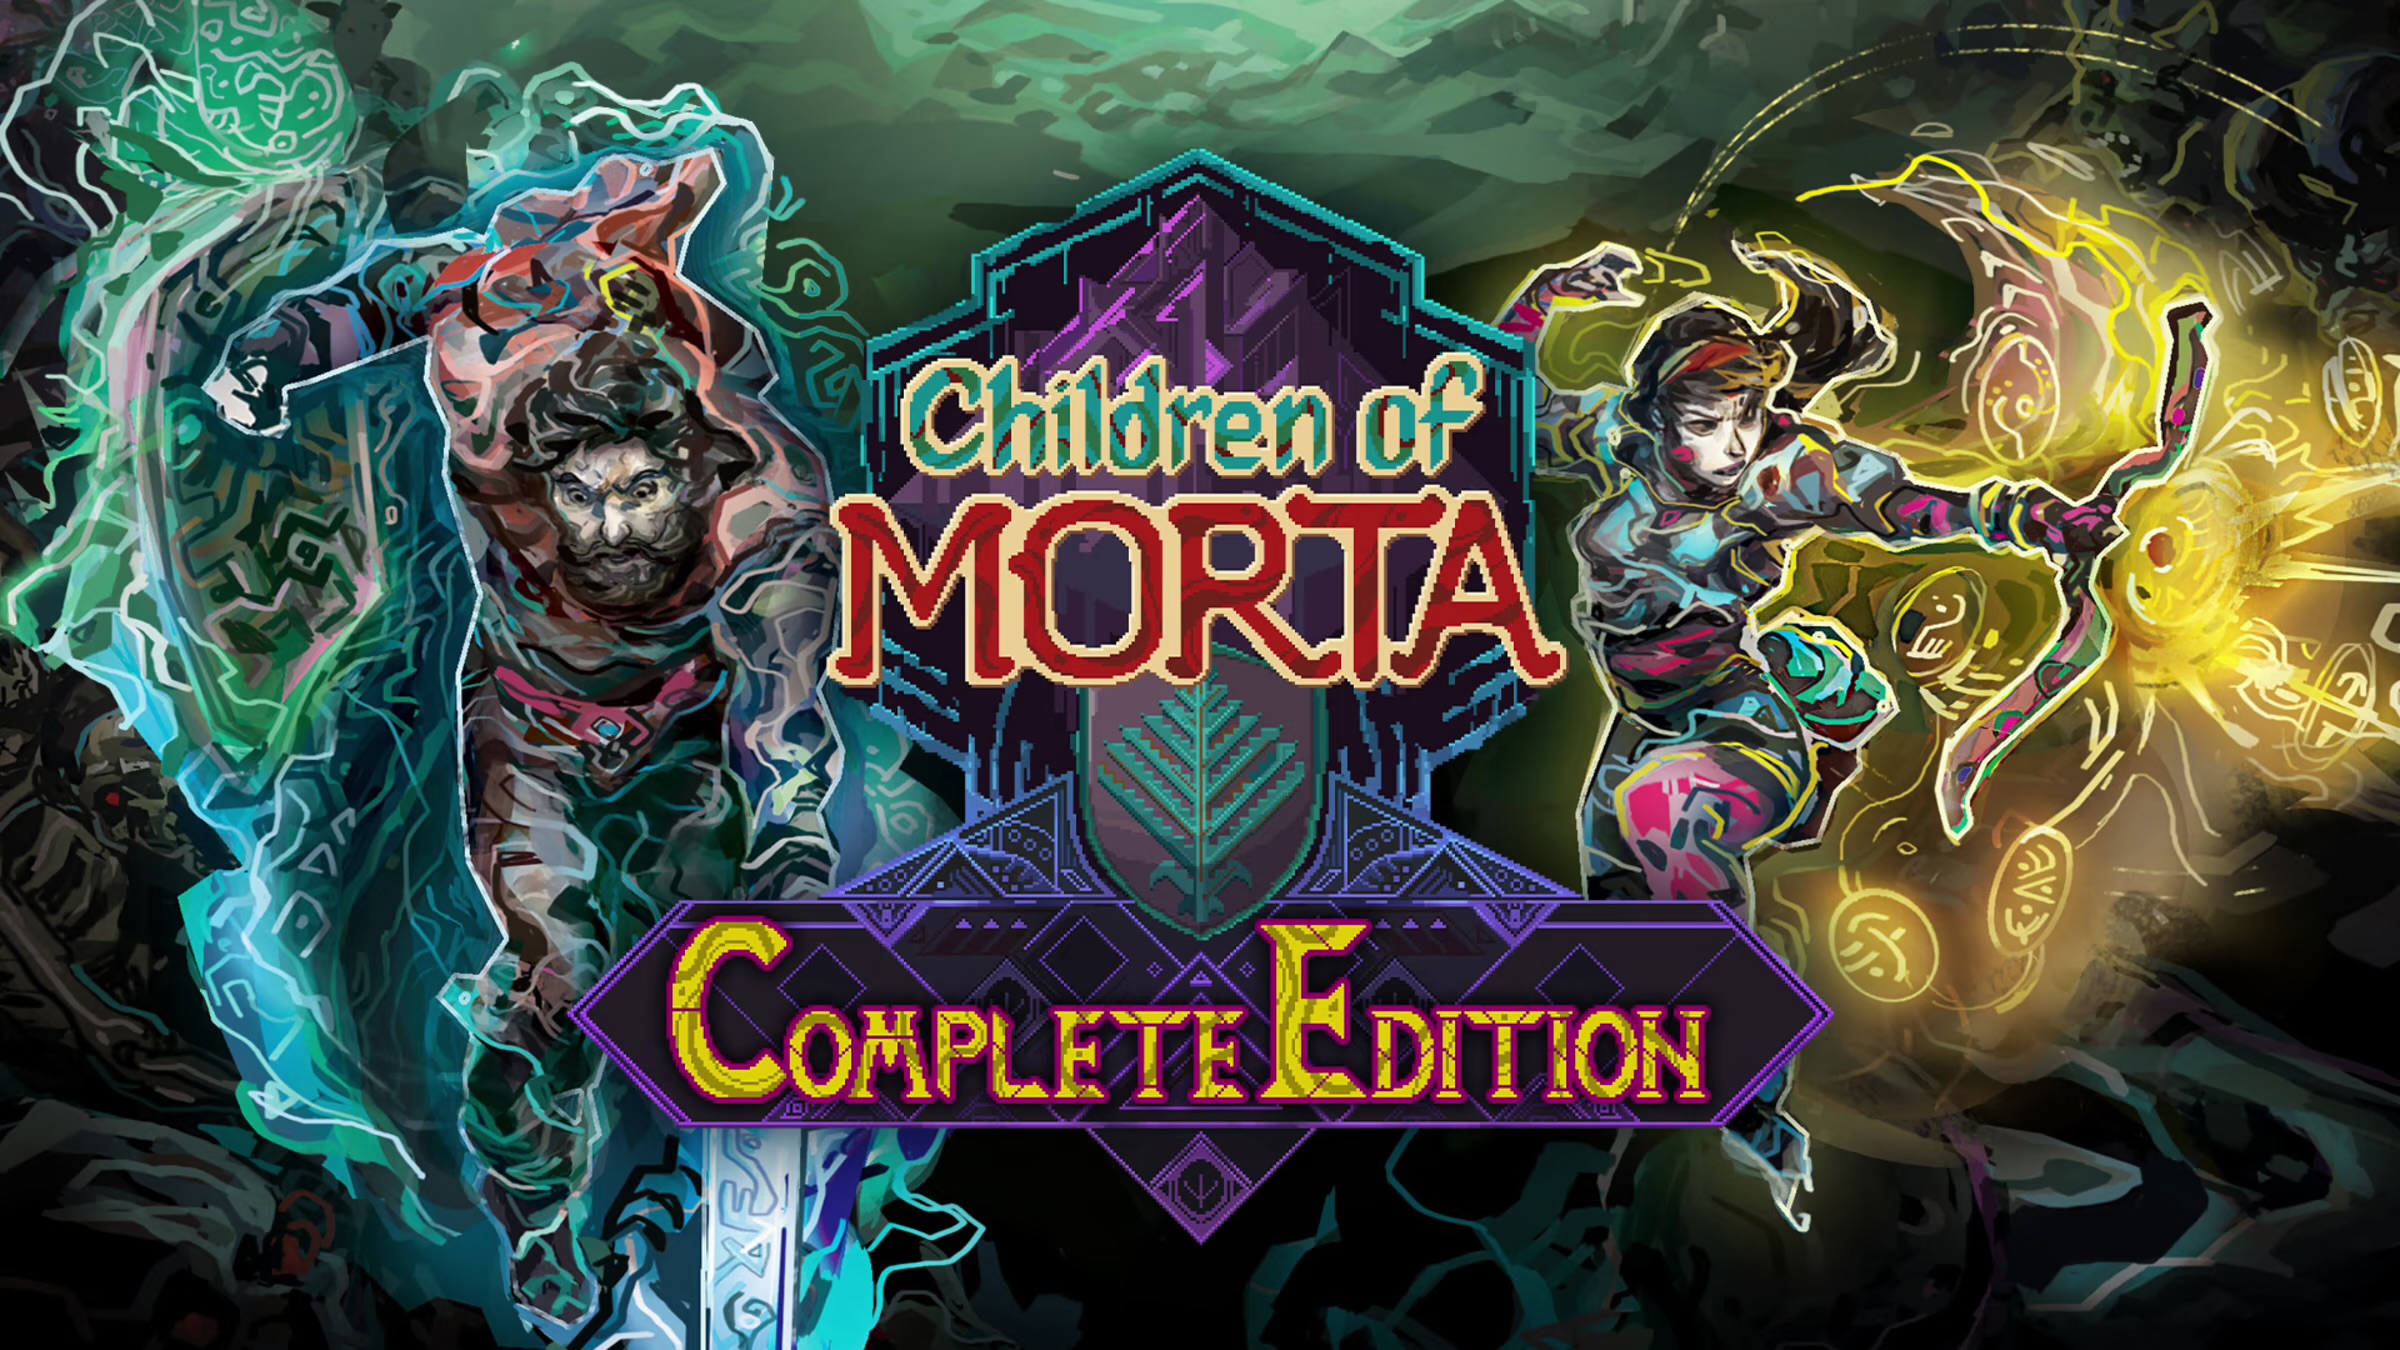 Children of Morta: Complete Edition - Xbox Digital - $8.09 with Game Pass